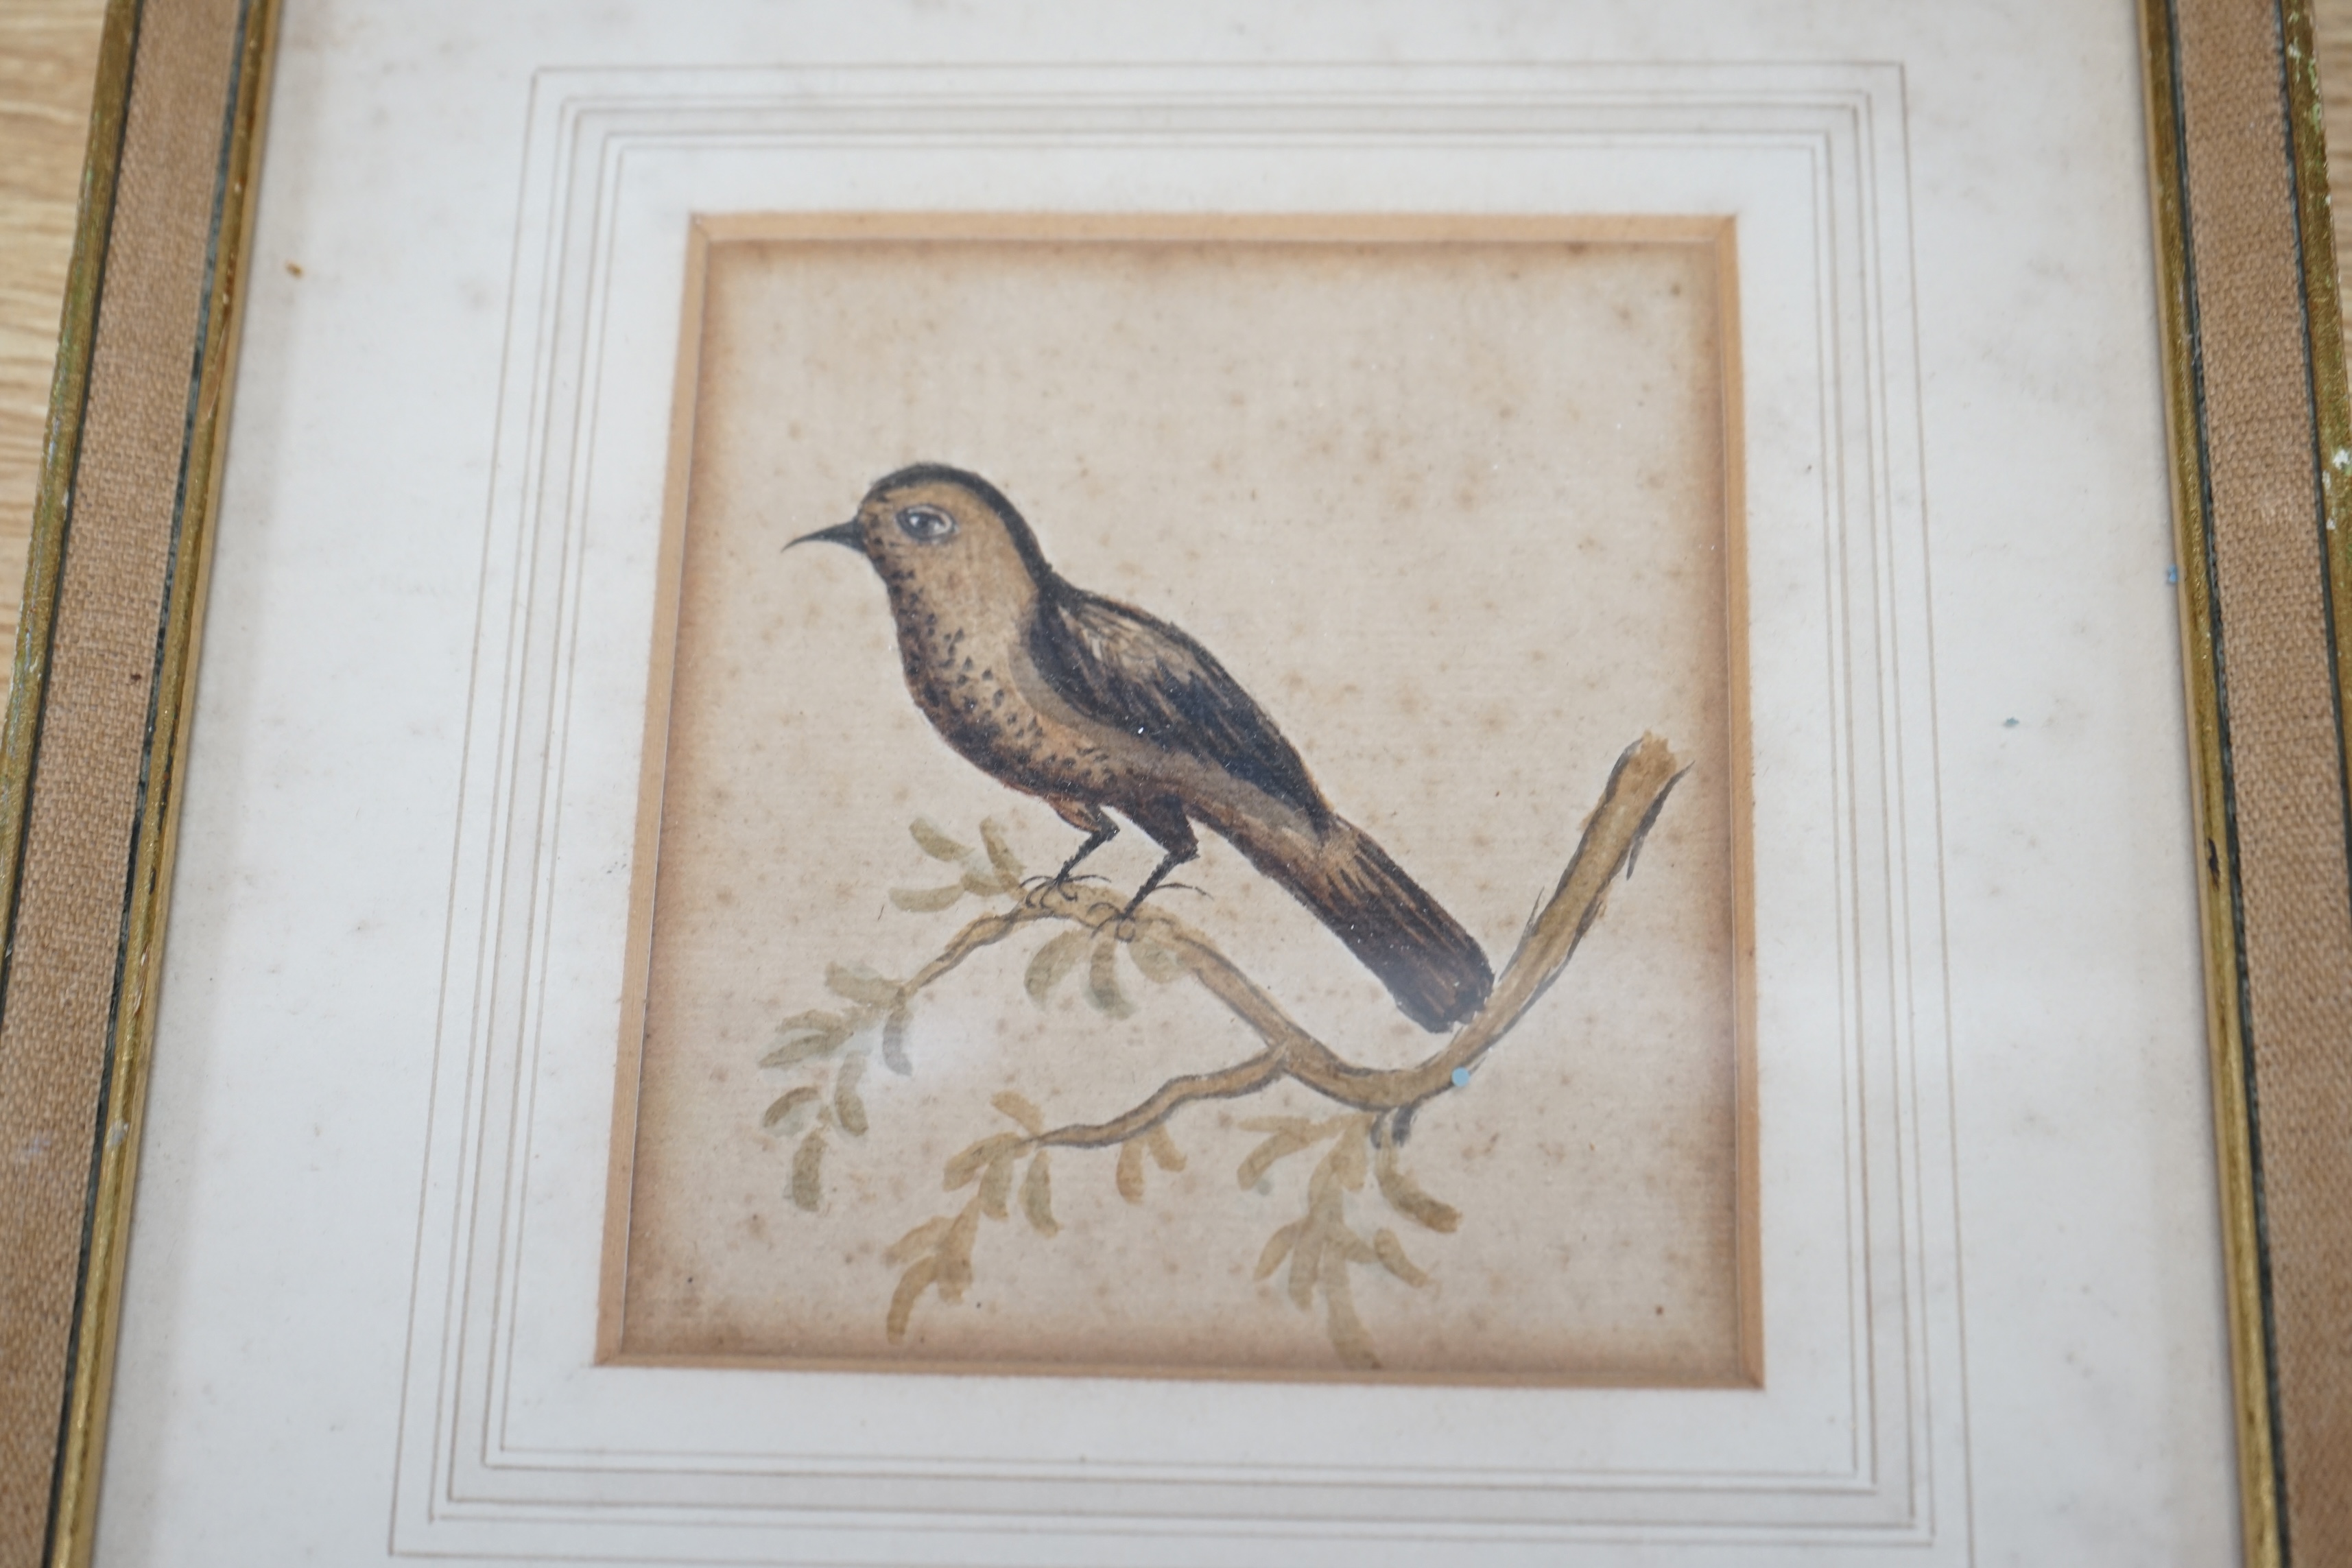 Talbot Kelly (1896-1971), watercolour, Birds on a branch, monogrammed and dated ‘21, together with a similar example, unsigned, largest 20 x 17cm. Condition - poor